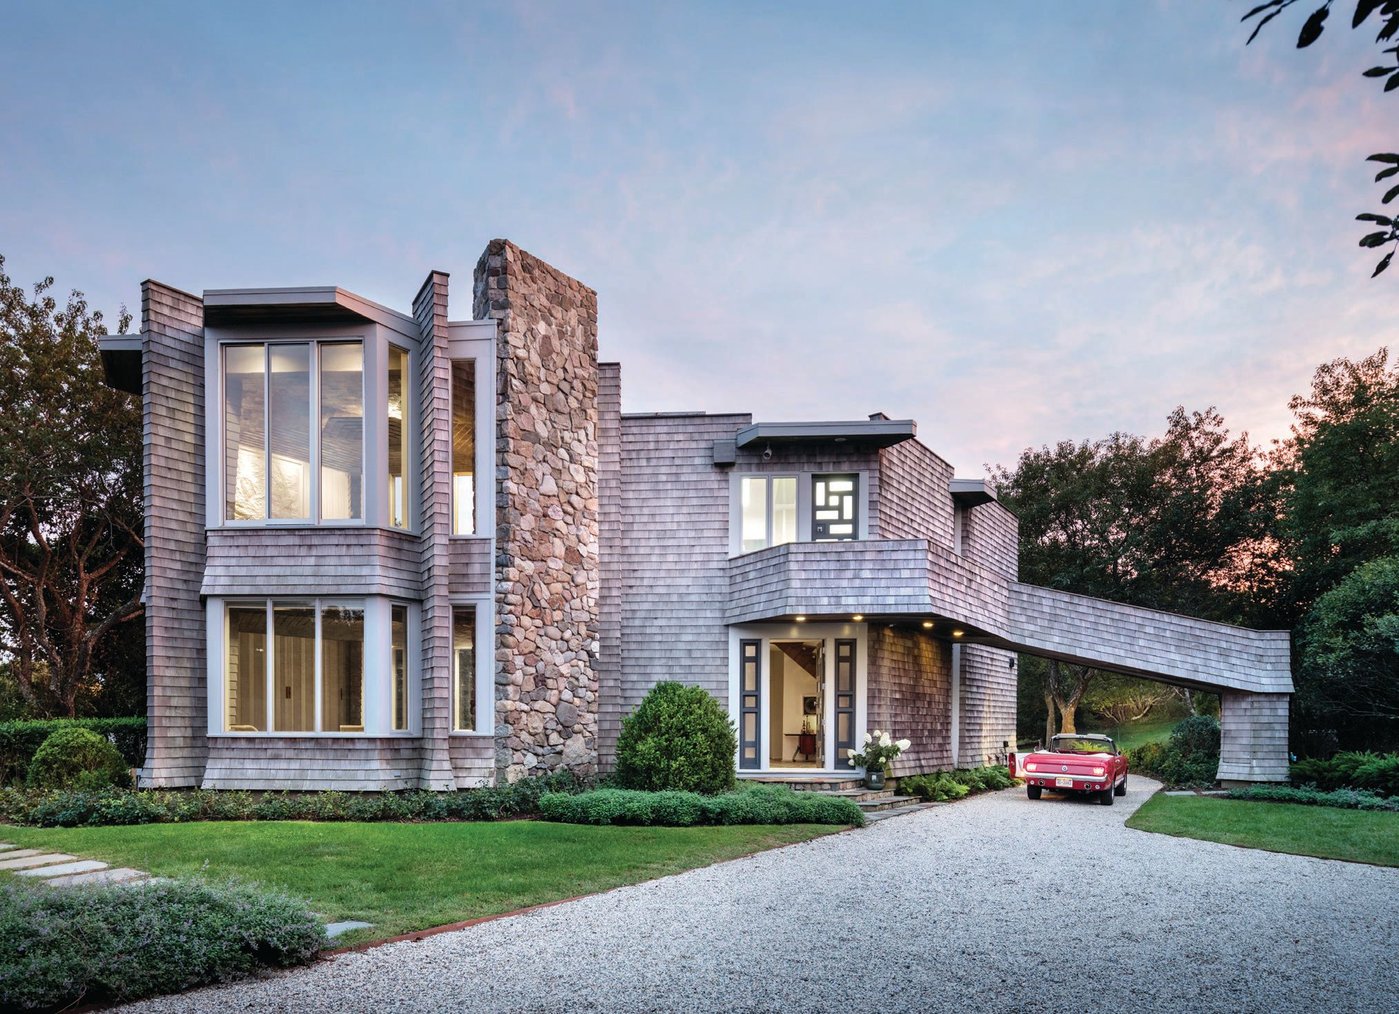 The sweeping exterior of Rottet’s home in Montauk. EXTERIOR PHOTO COURTESY OF SCOTT FRANCES